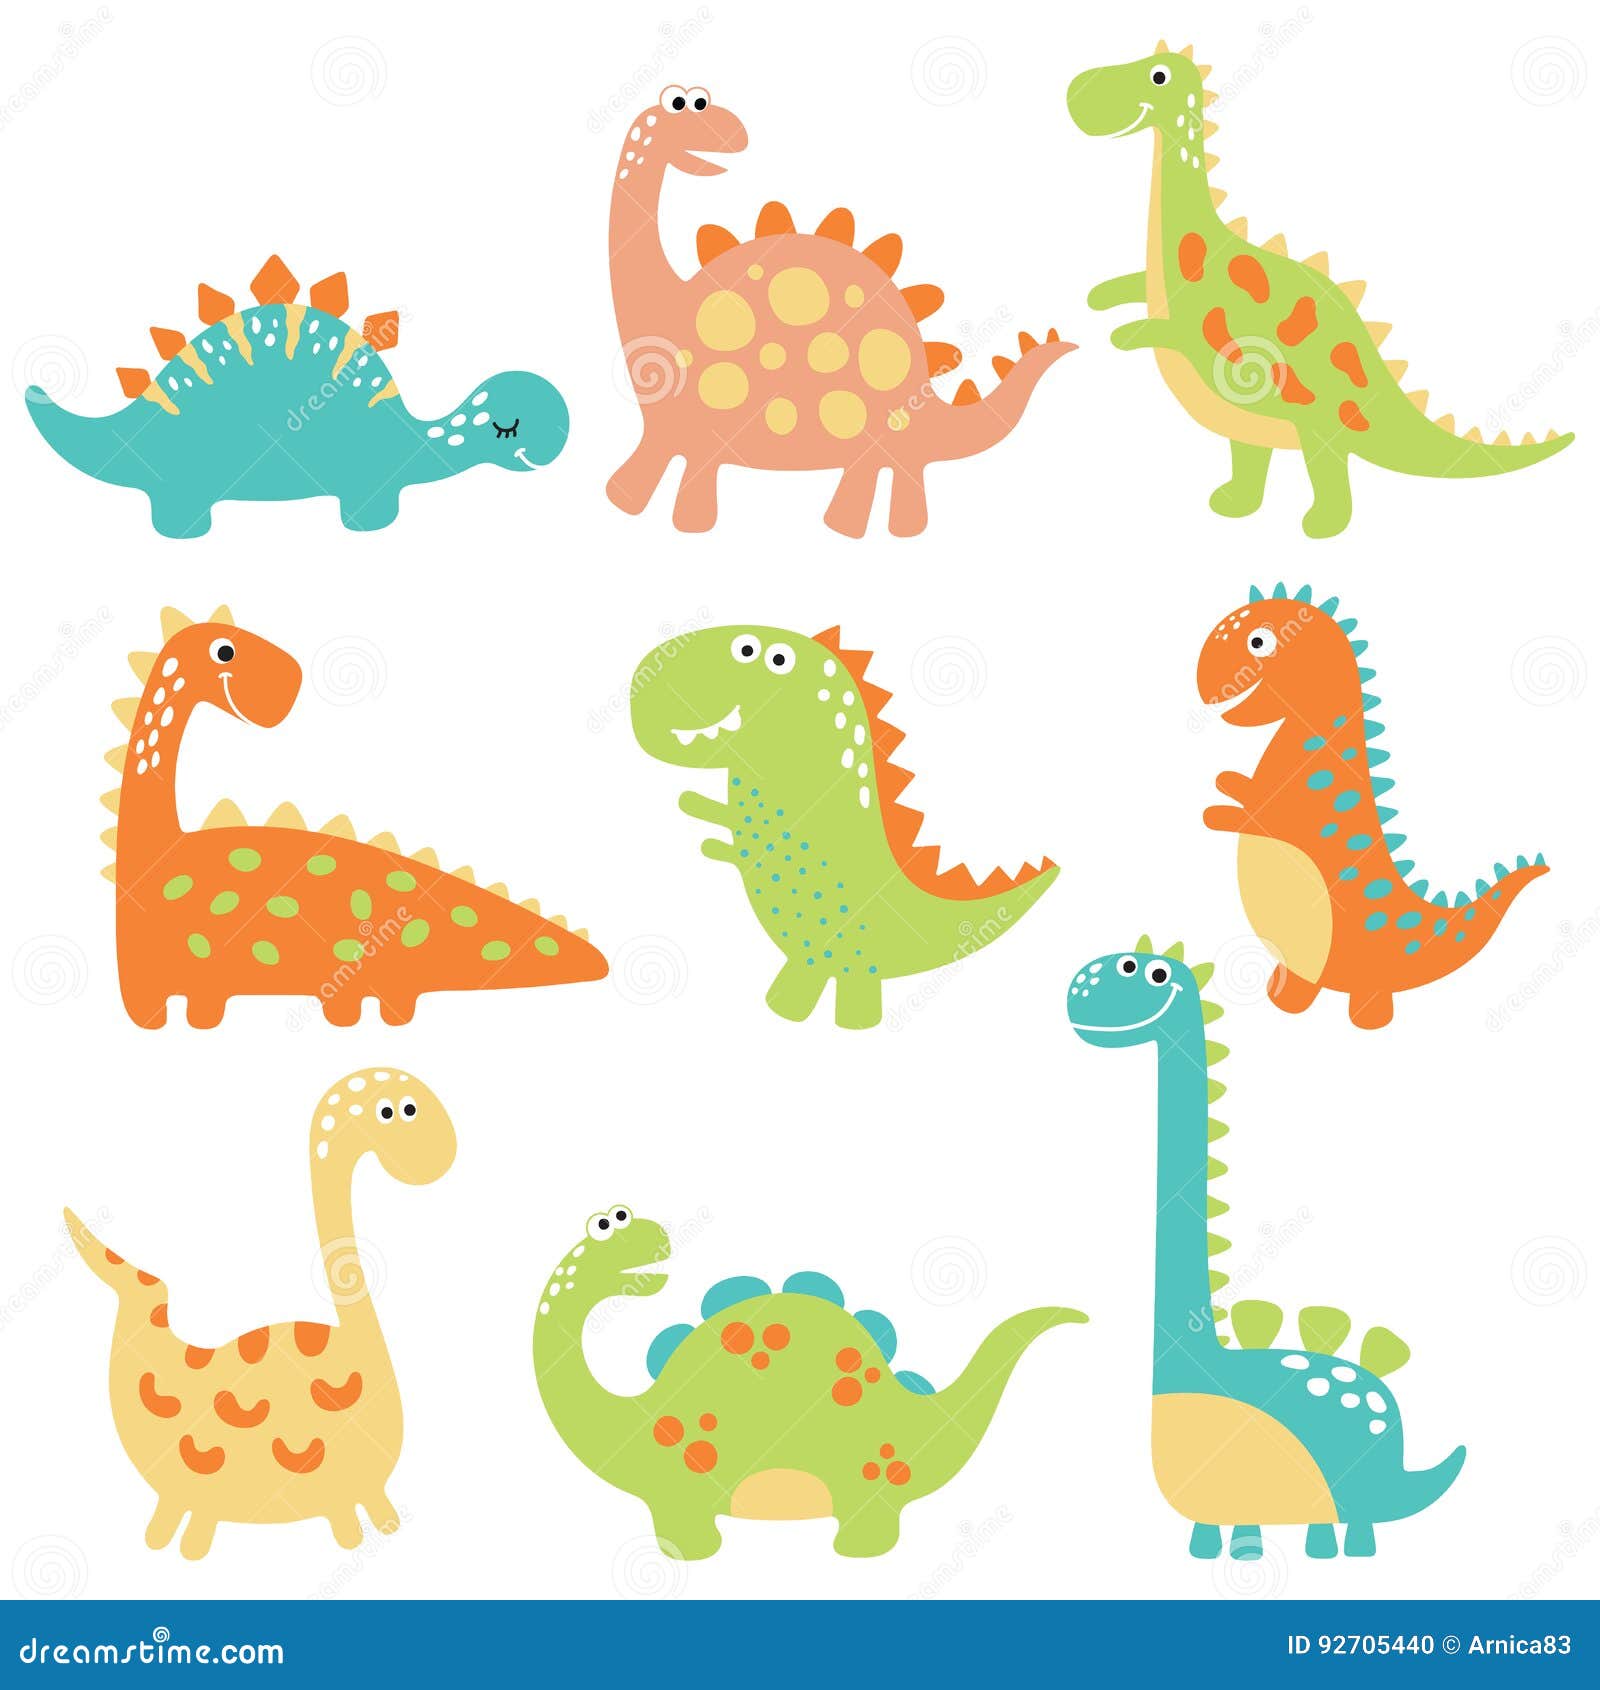 Cute dino illustration stock vector. Illustration of collection - 92705440